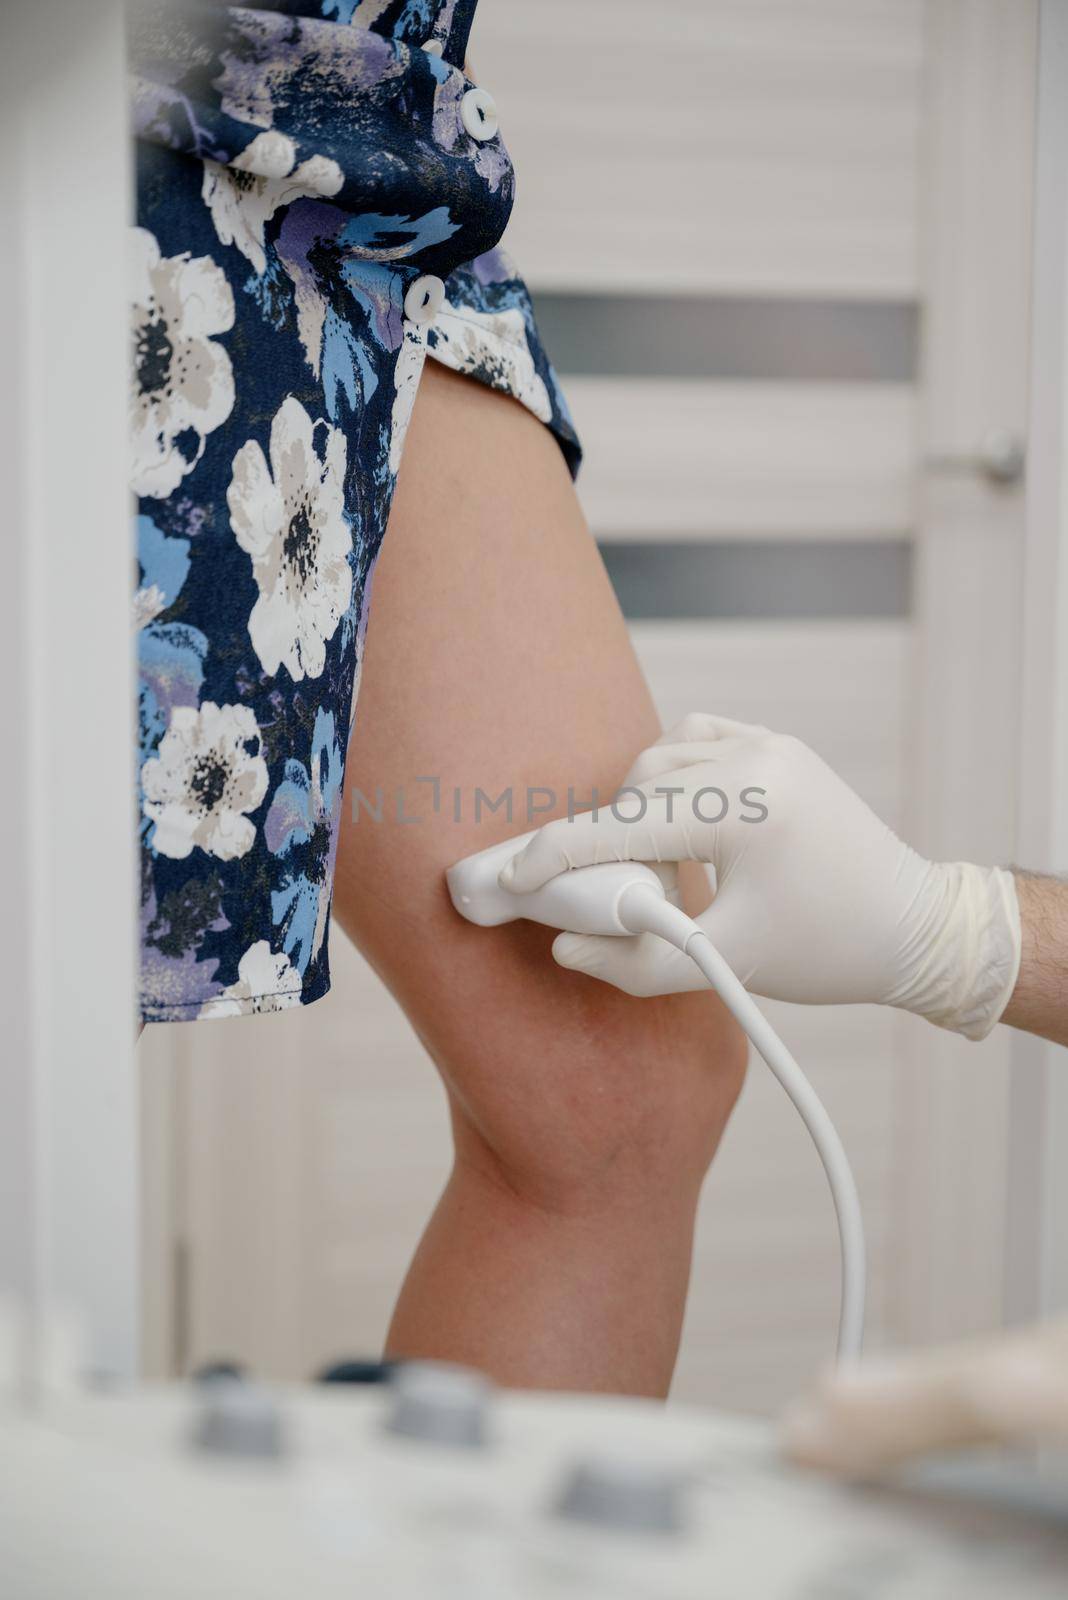 An orthopedic surgeon performs an ultrasound examination of the patient's leg veins in his office.Doctor ultrasound knee test. Scan medical equipment. Varicose ankle exam tool.